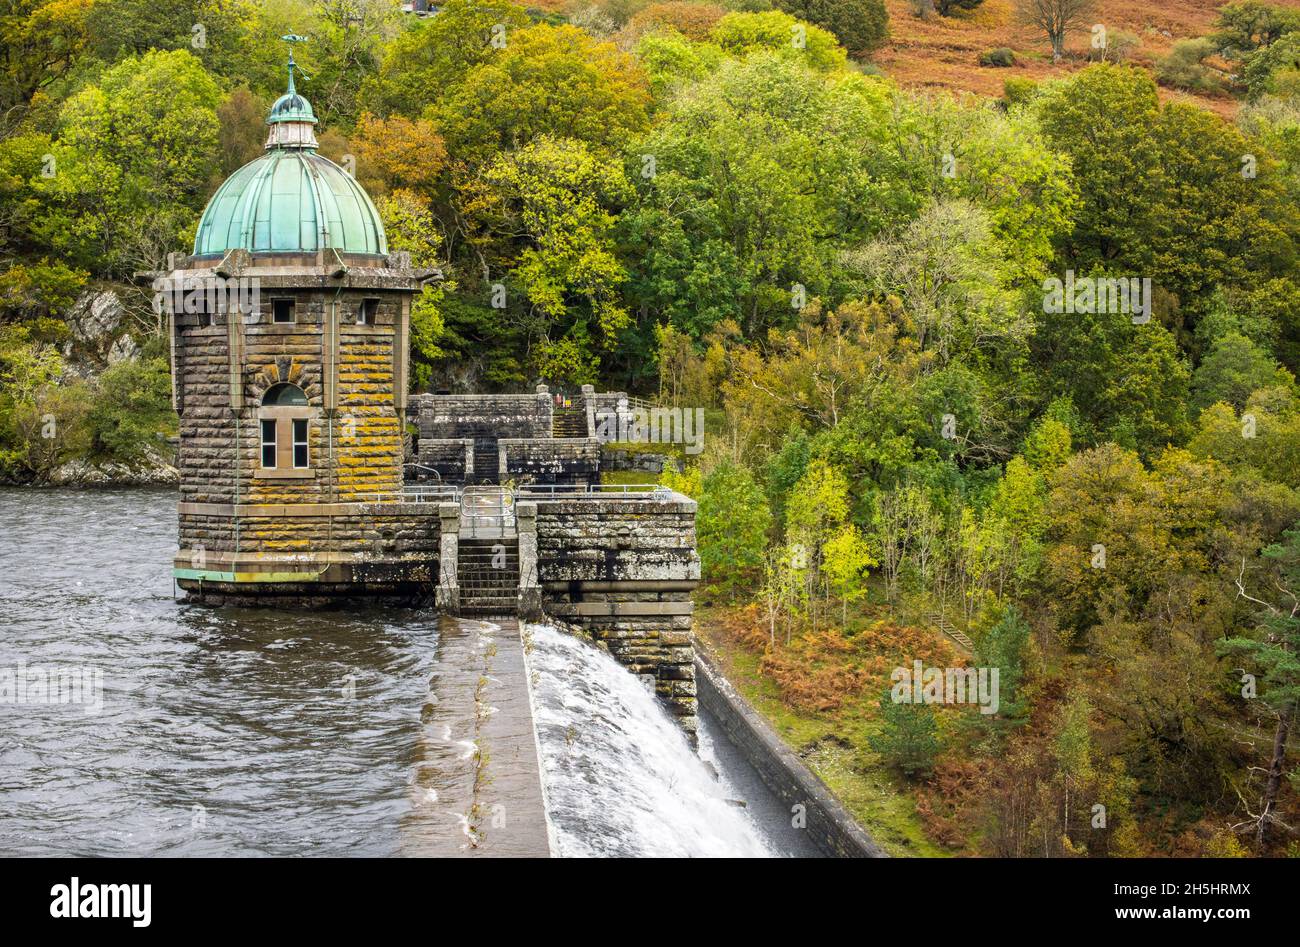 A view of the Pen y Garreg Dam in the Elan Valley in October with water flowing over the top Stock Photo